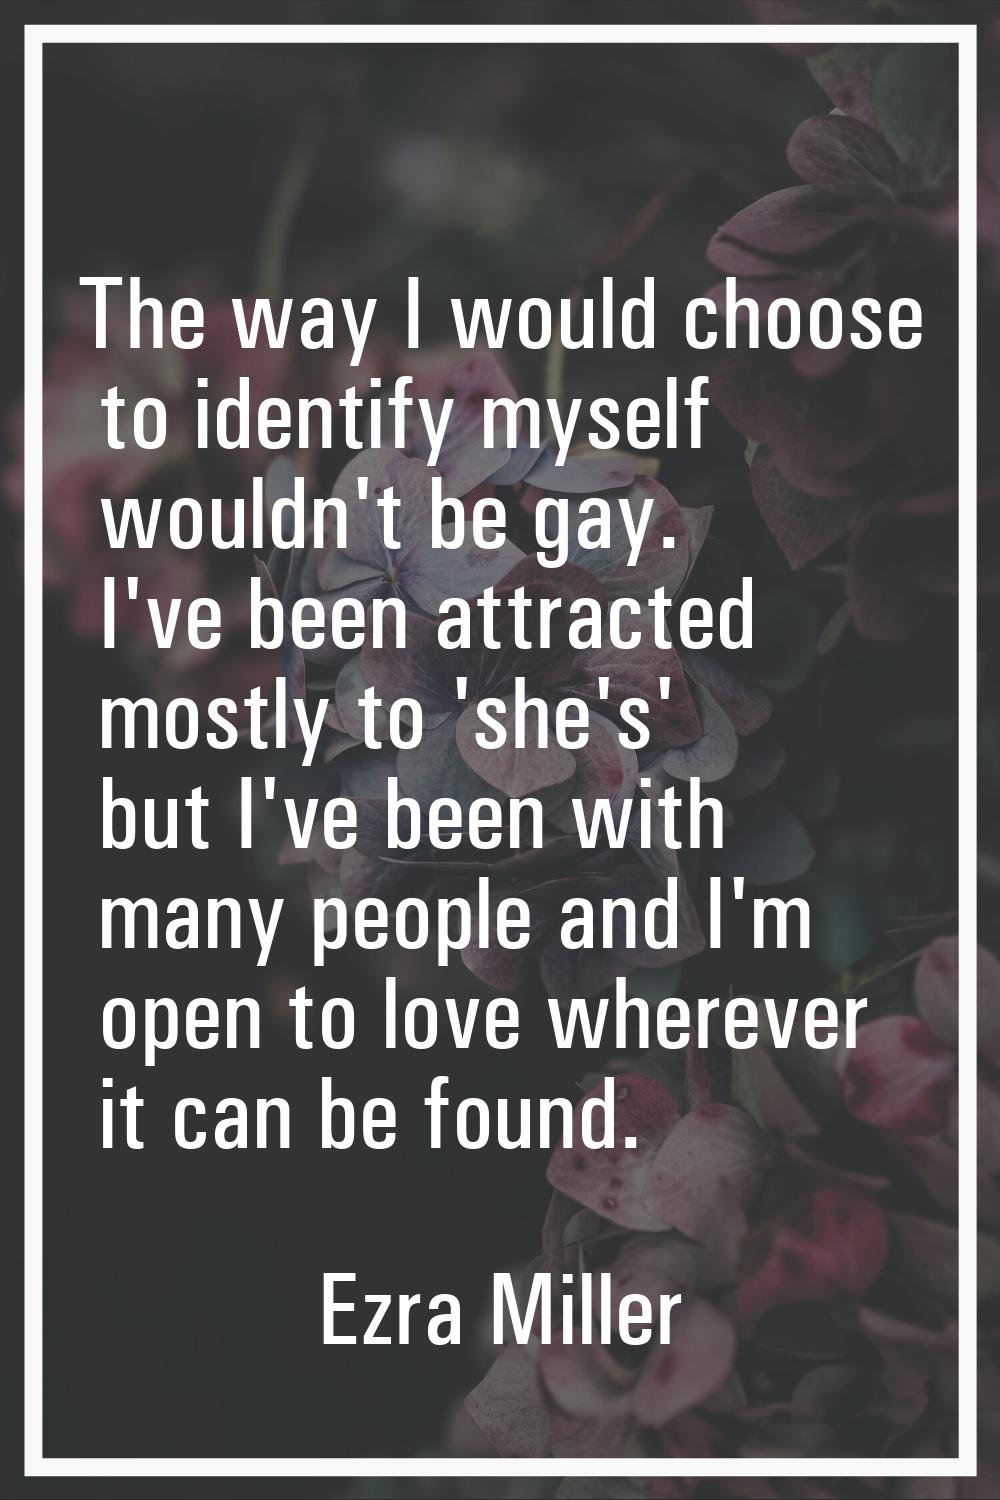 The way I would choose to identify myself wouldn't be gay. I've been attracted mostly to 'she's' bu